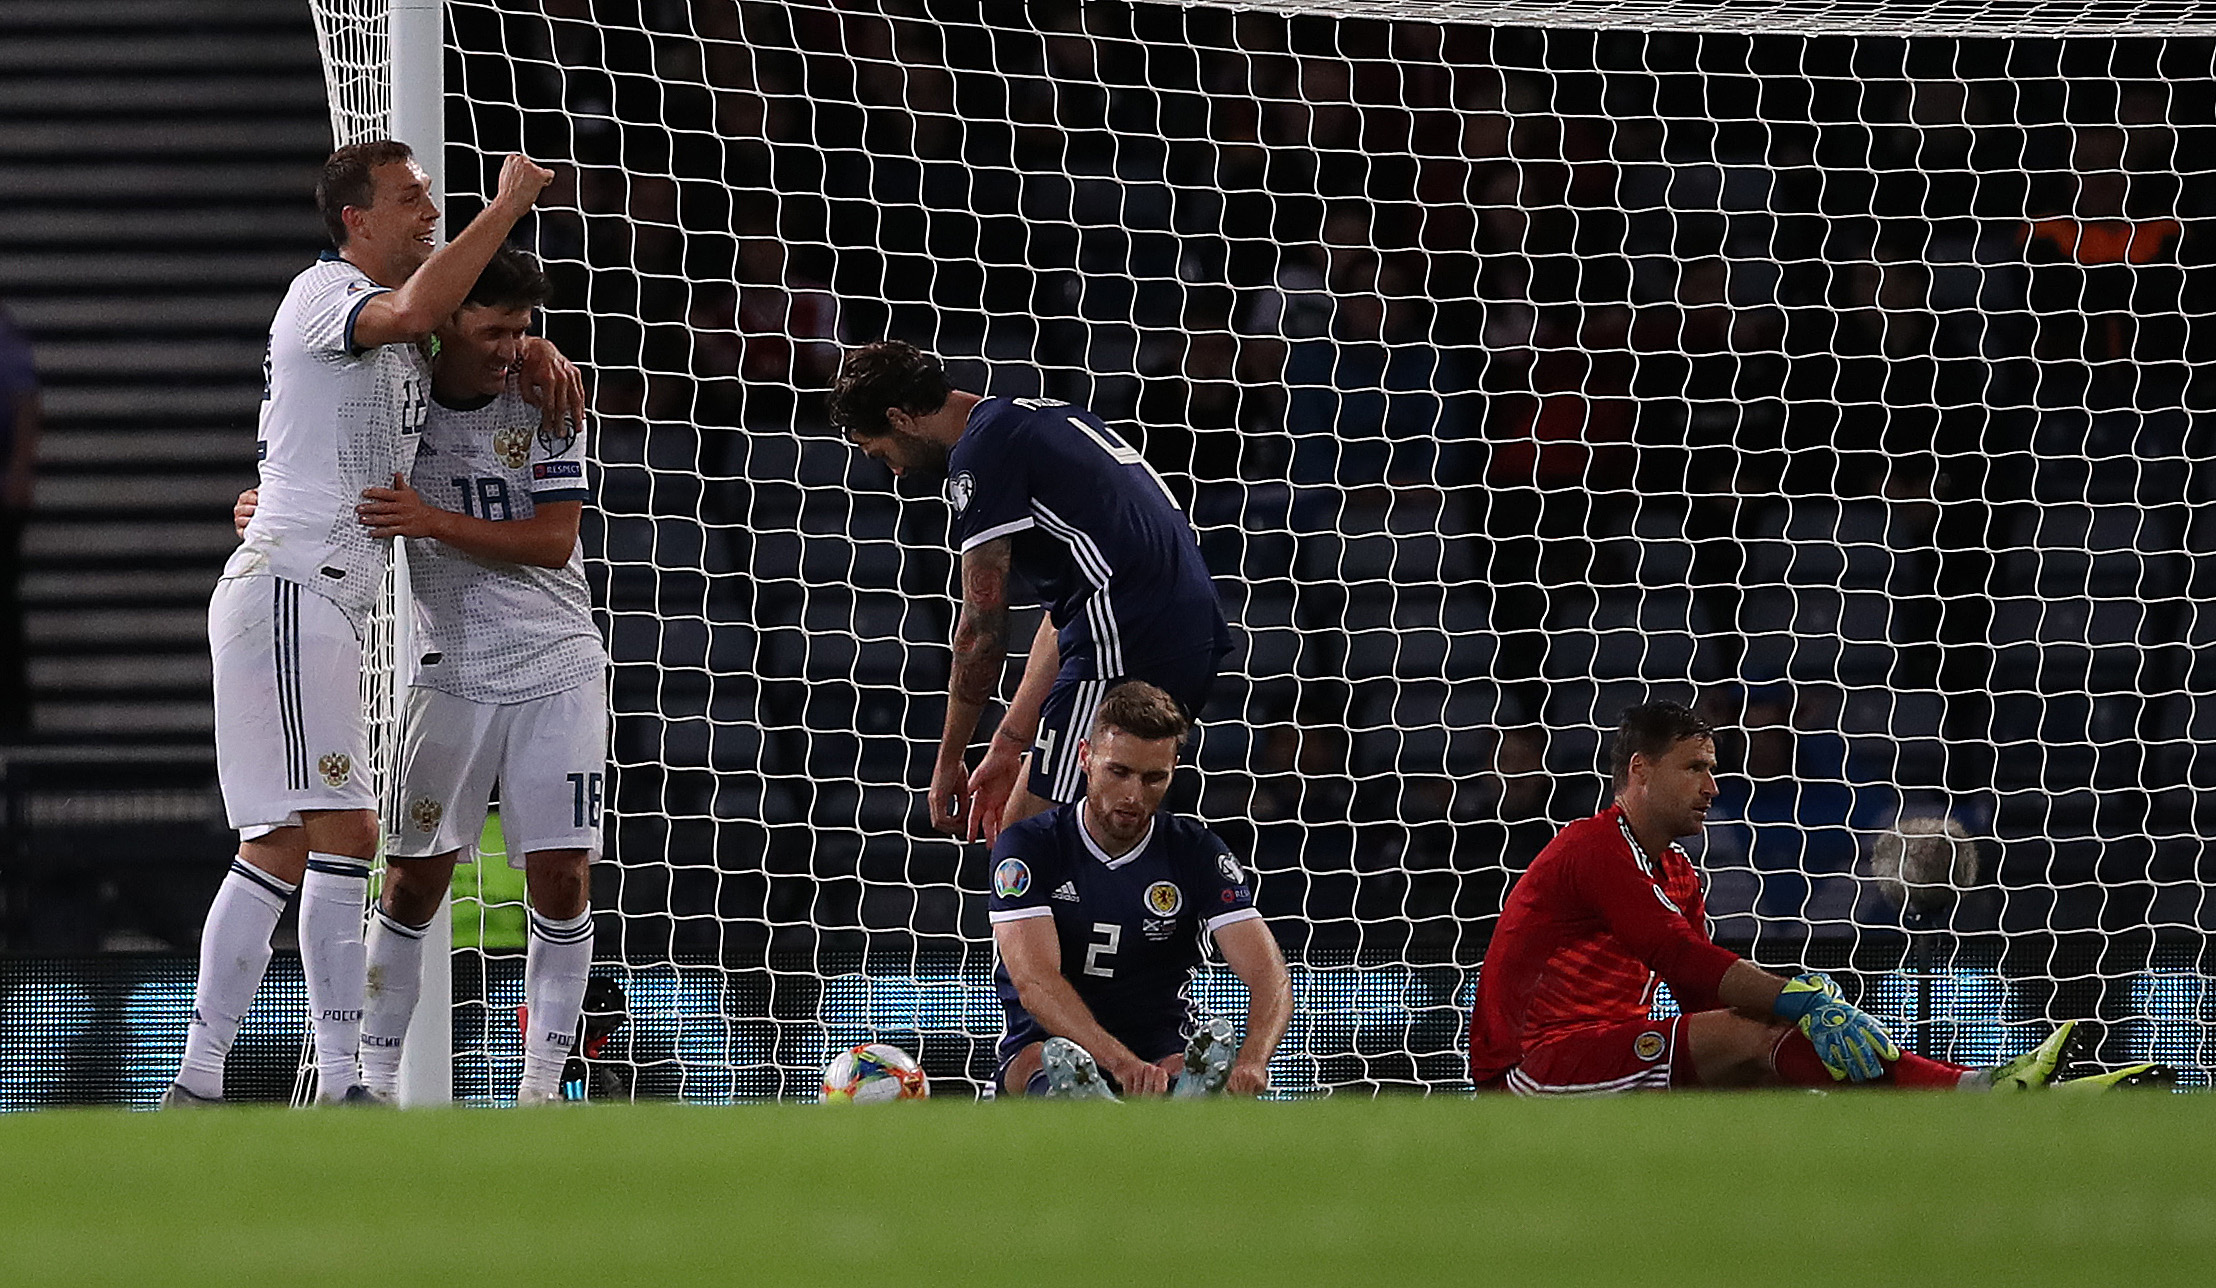 Stephen O'Donnell looks on as Yuri Zhirkov celebrates Russia's second goal.